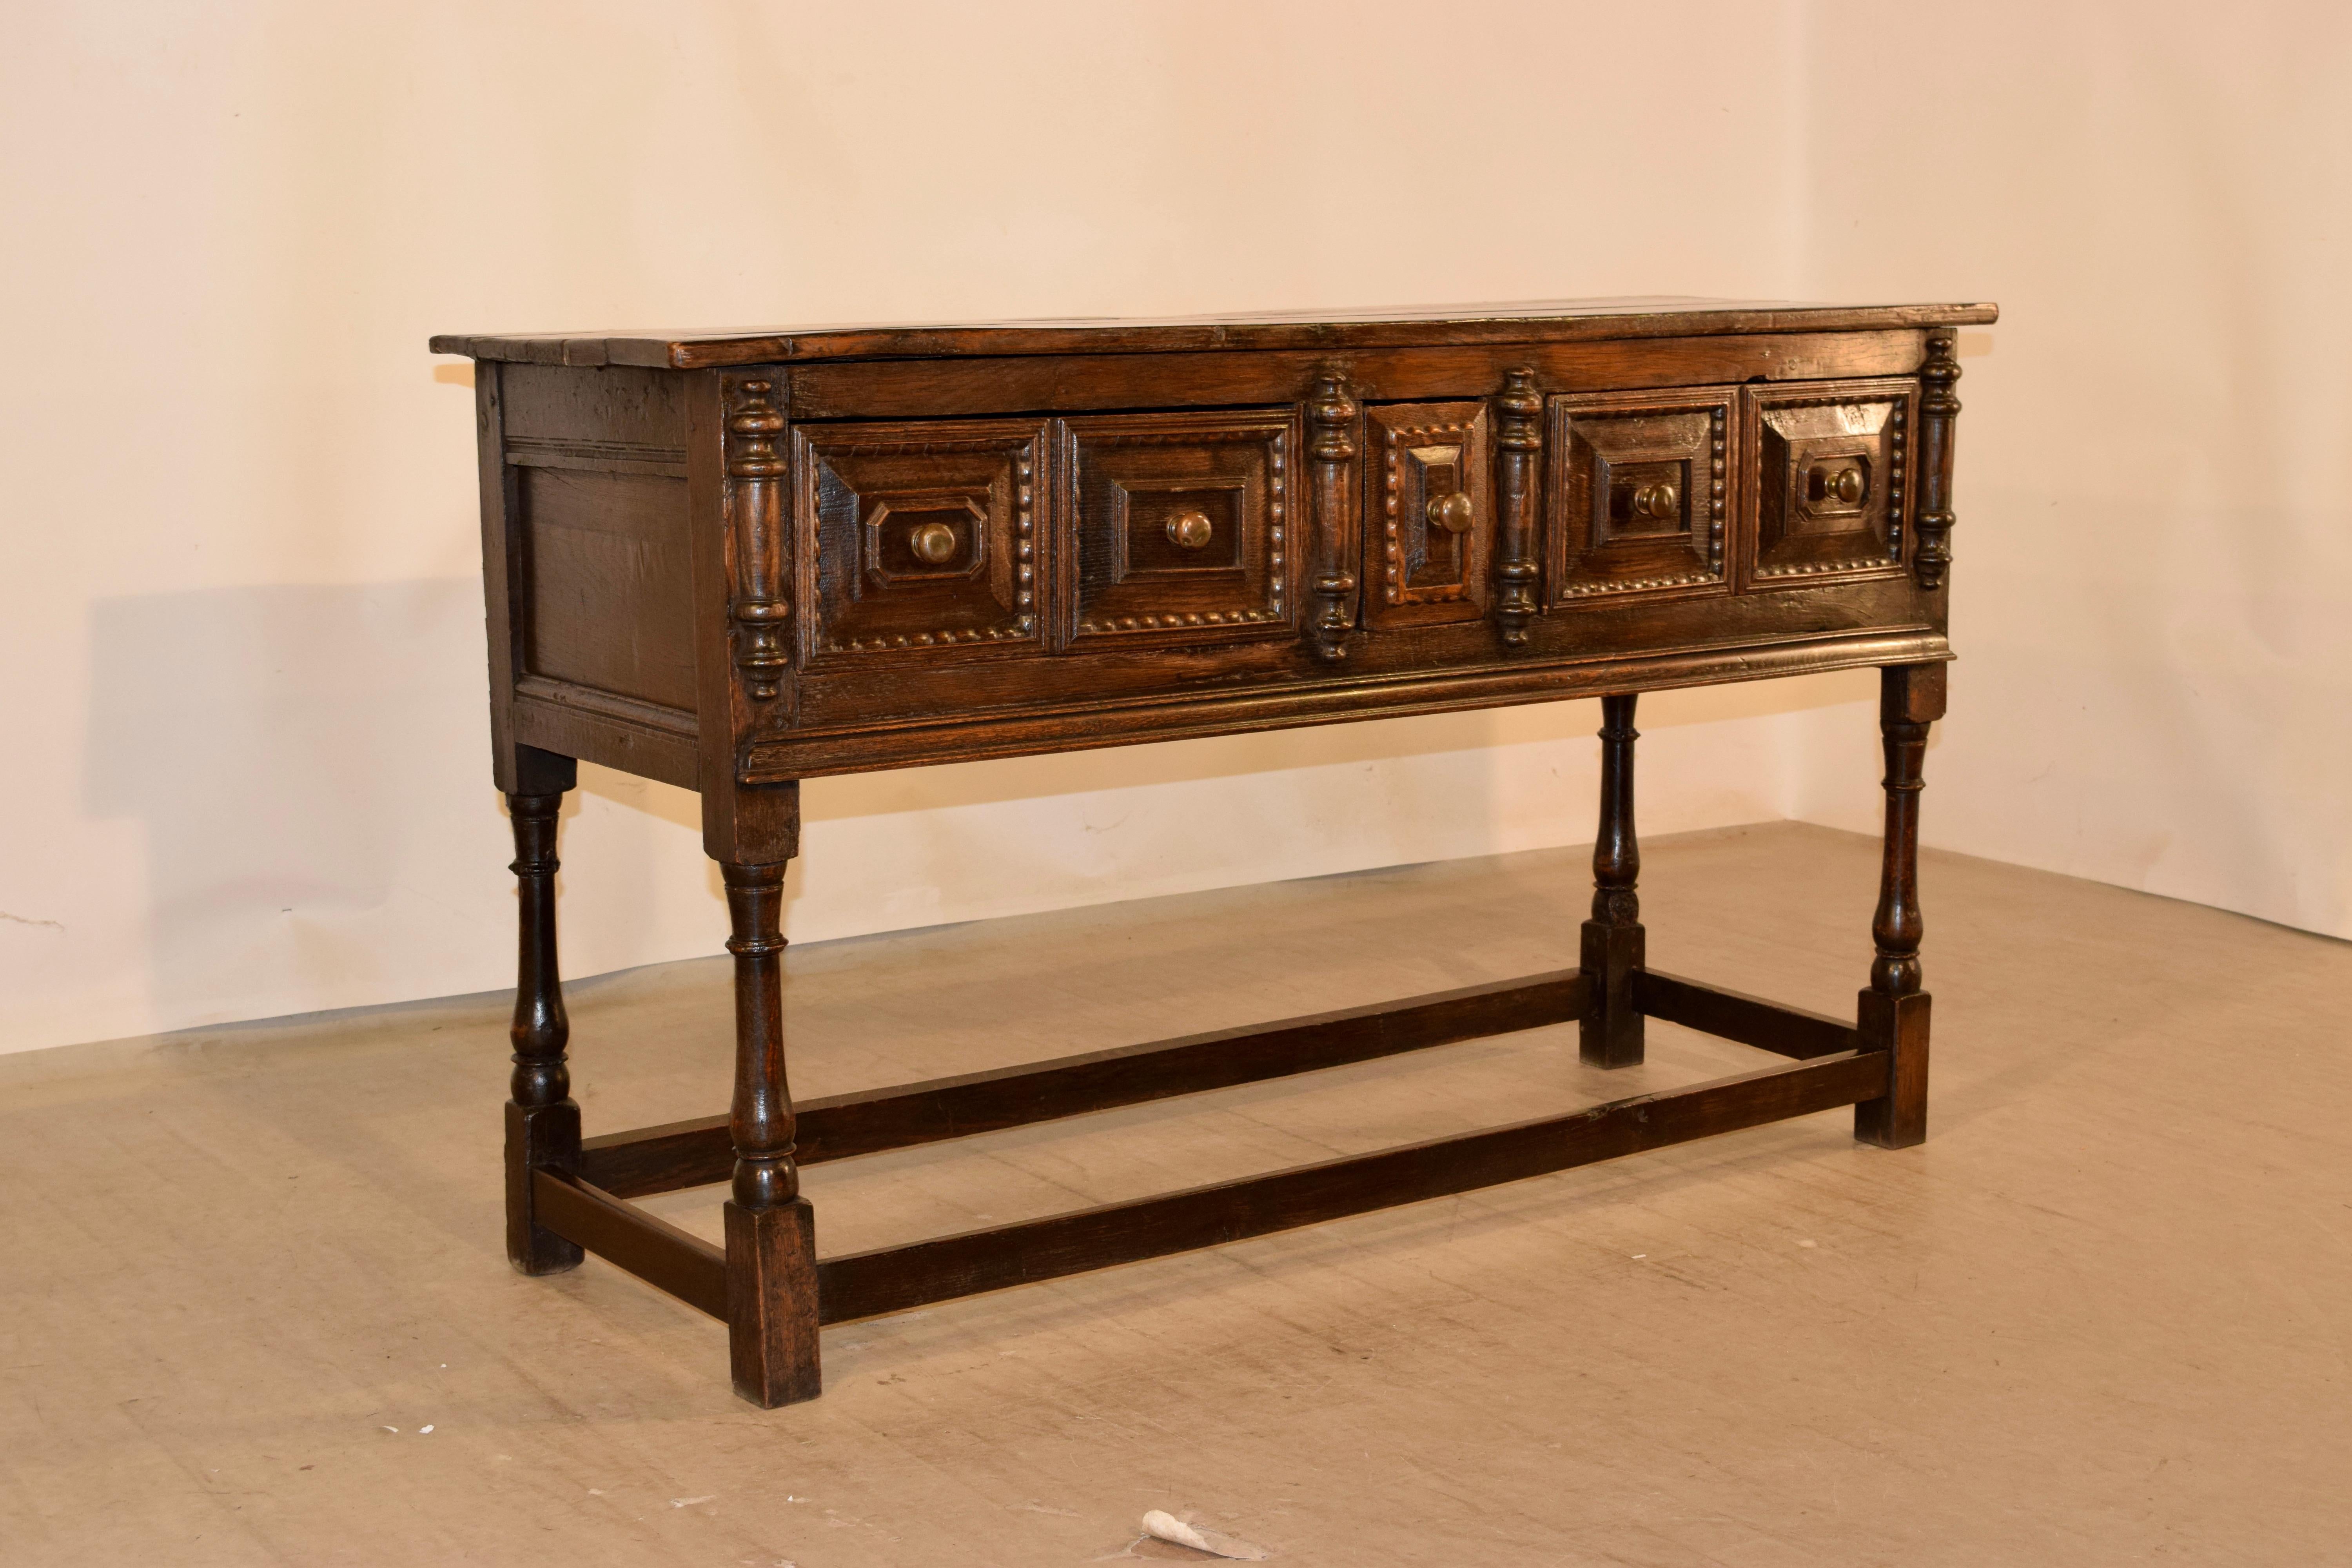 18th century oak sideboard from England with a plank top, following down to hand paneled sides and a single candle drawer in the front, flanked by cushion paneled drawers. There are applied turnings flanking the drawers as well, for added interest.